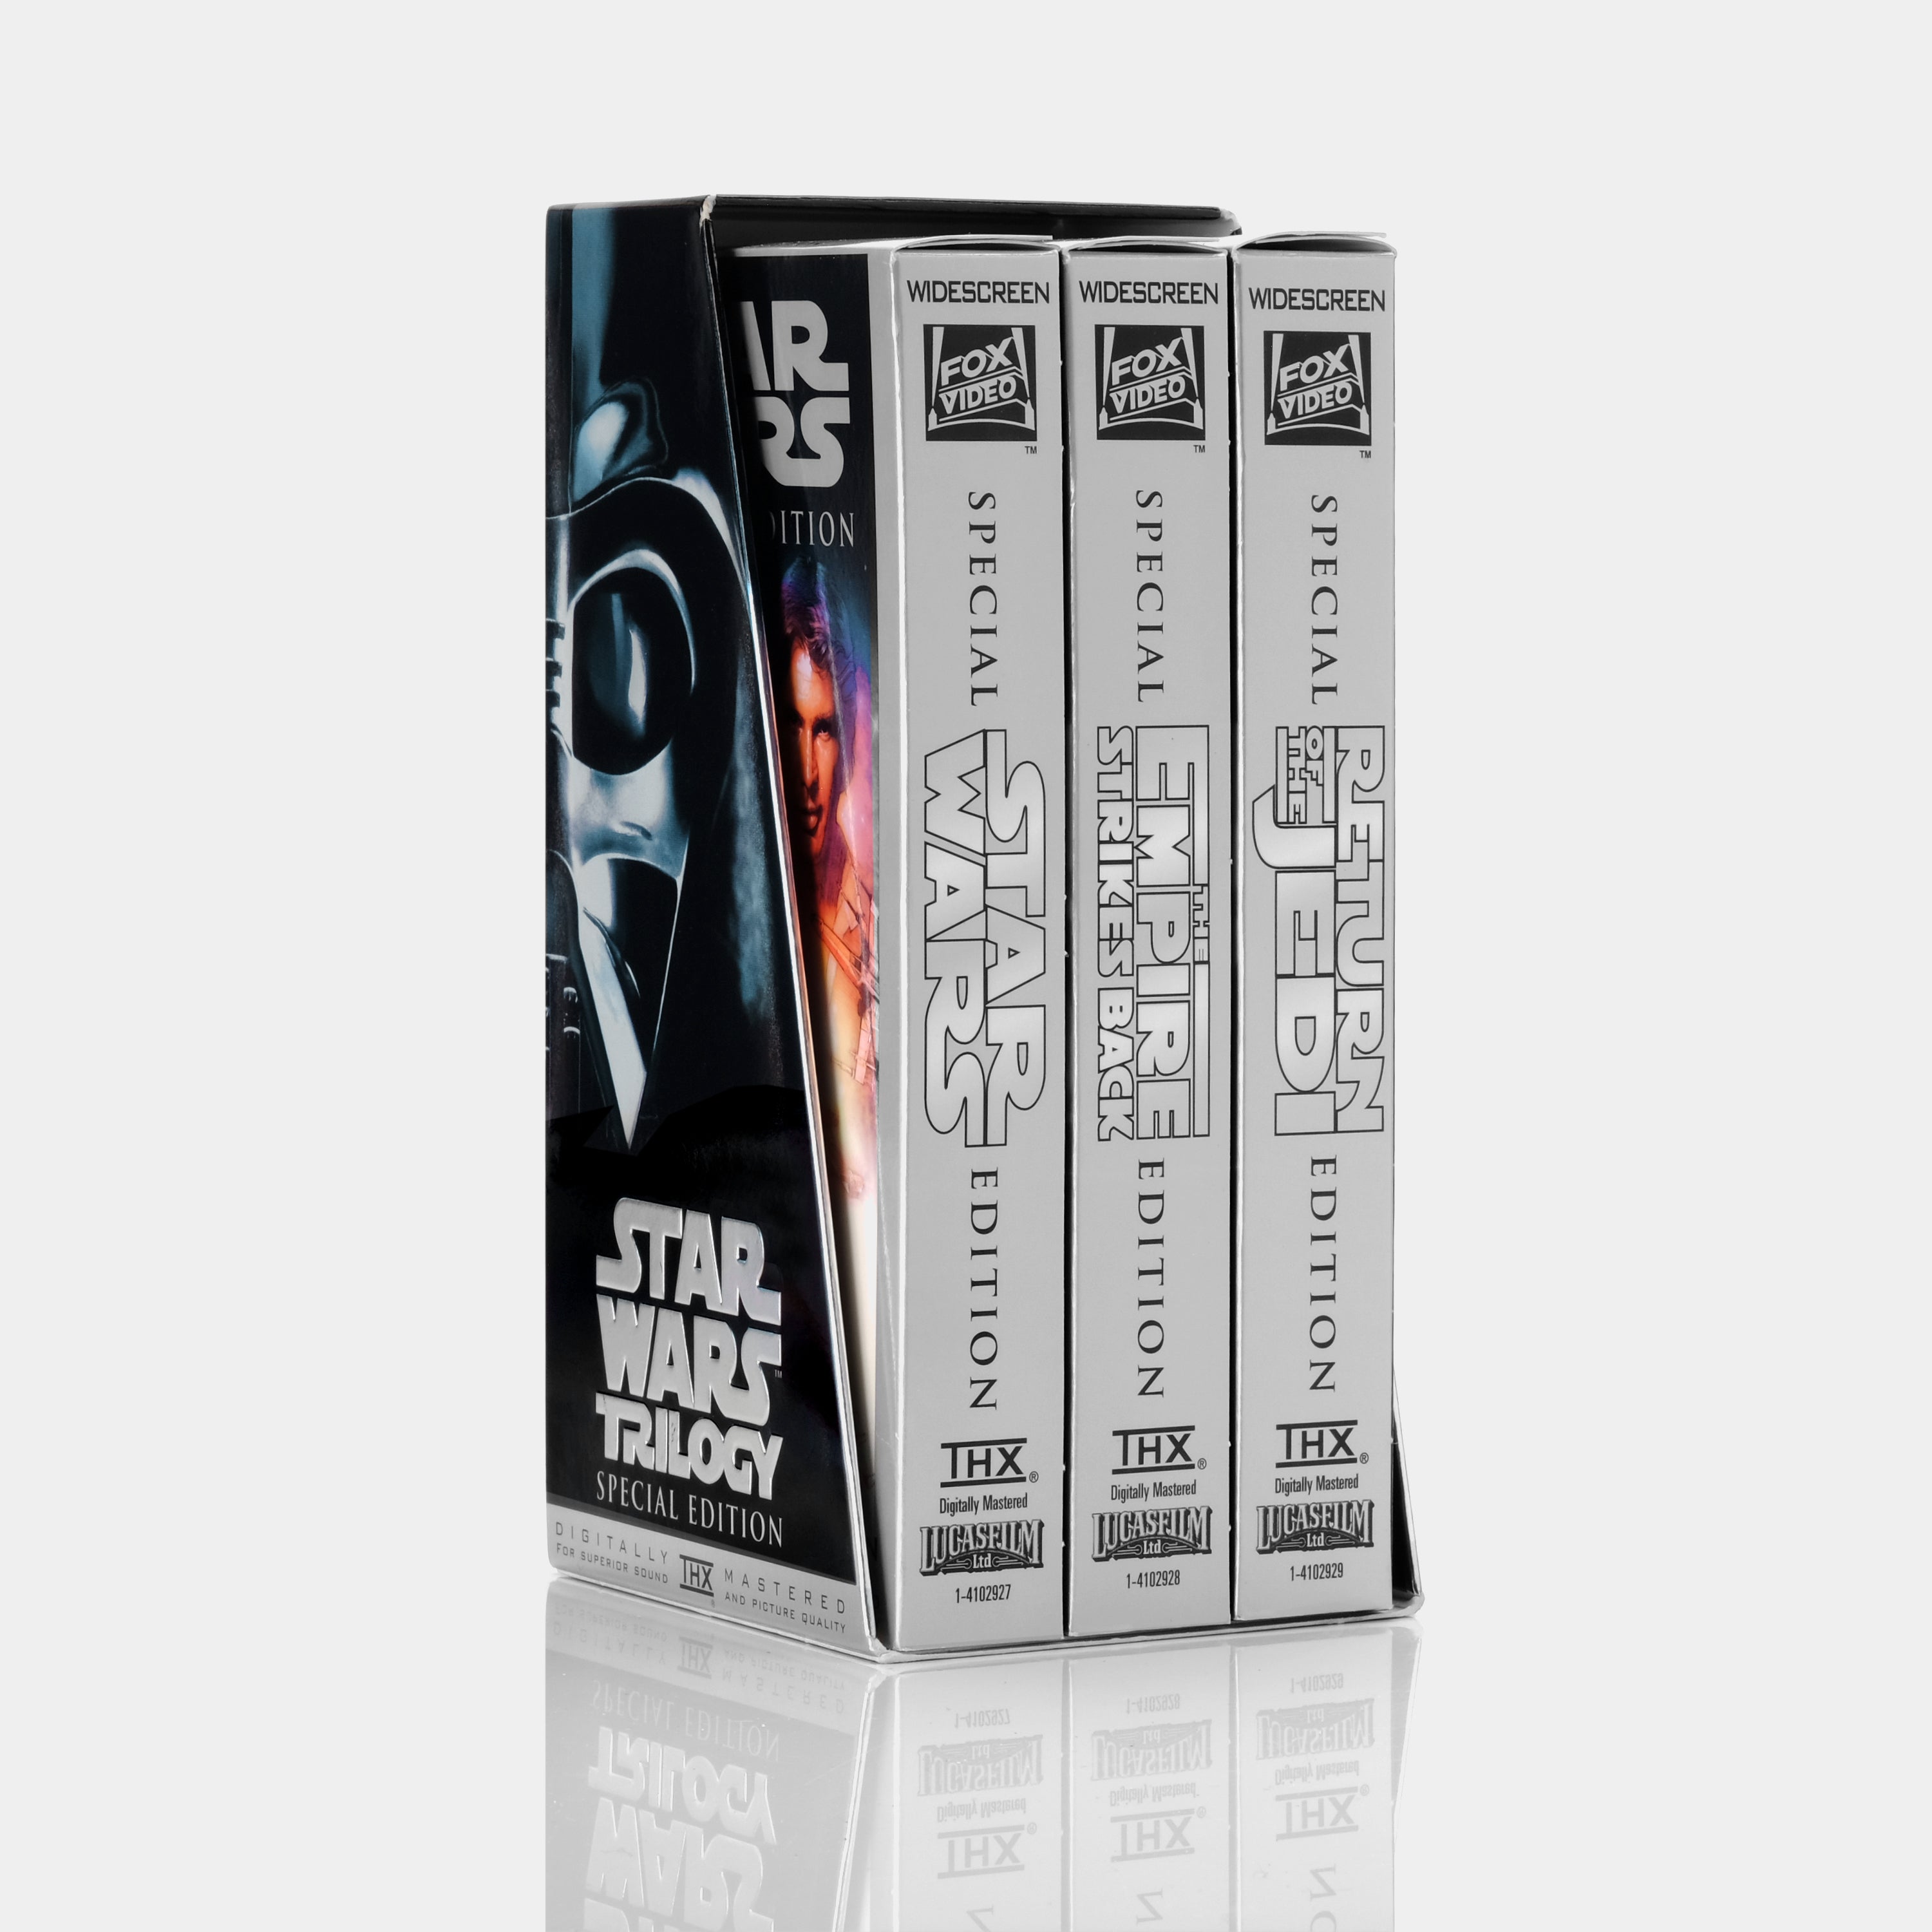 Star Wars Trilogy: Special Edition VHS Tape Set